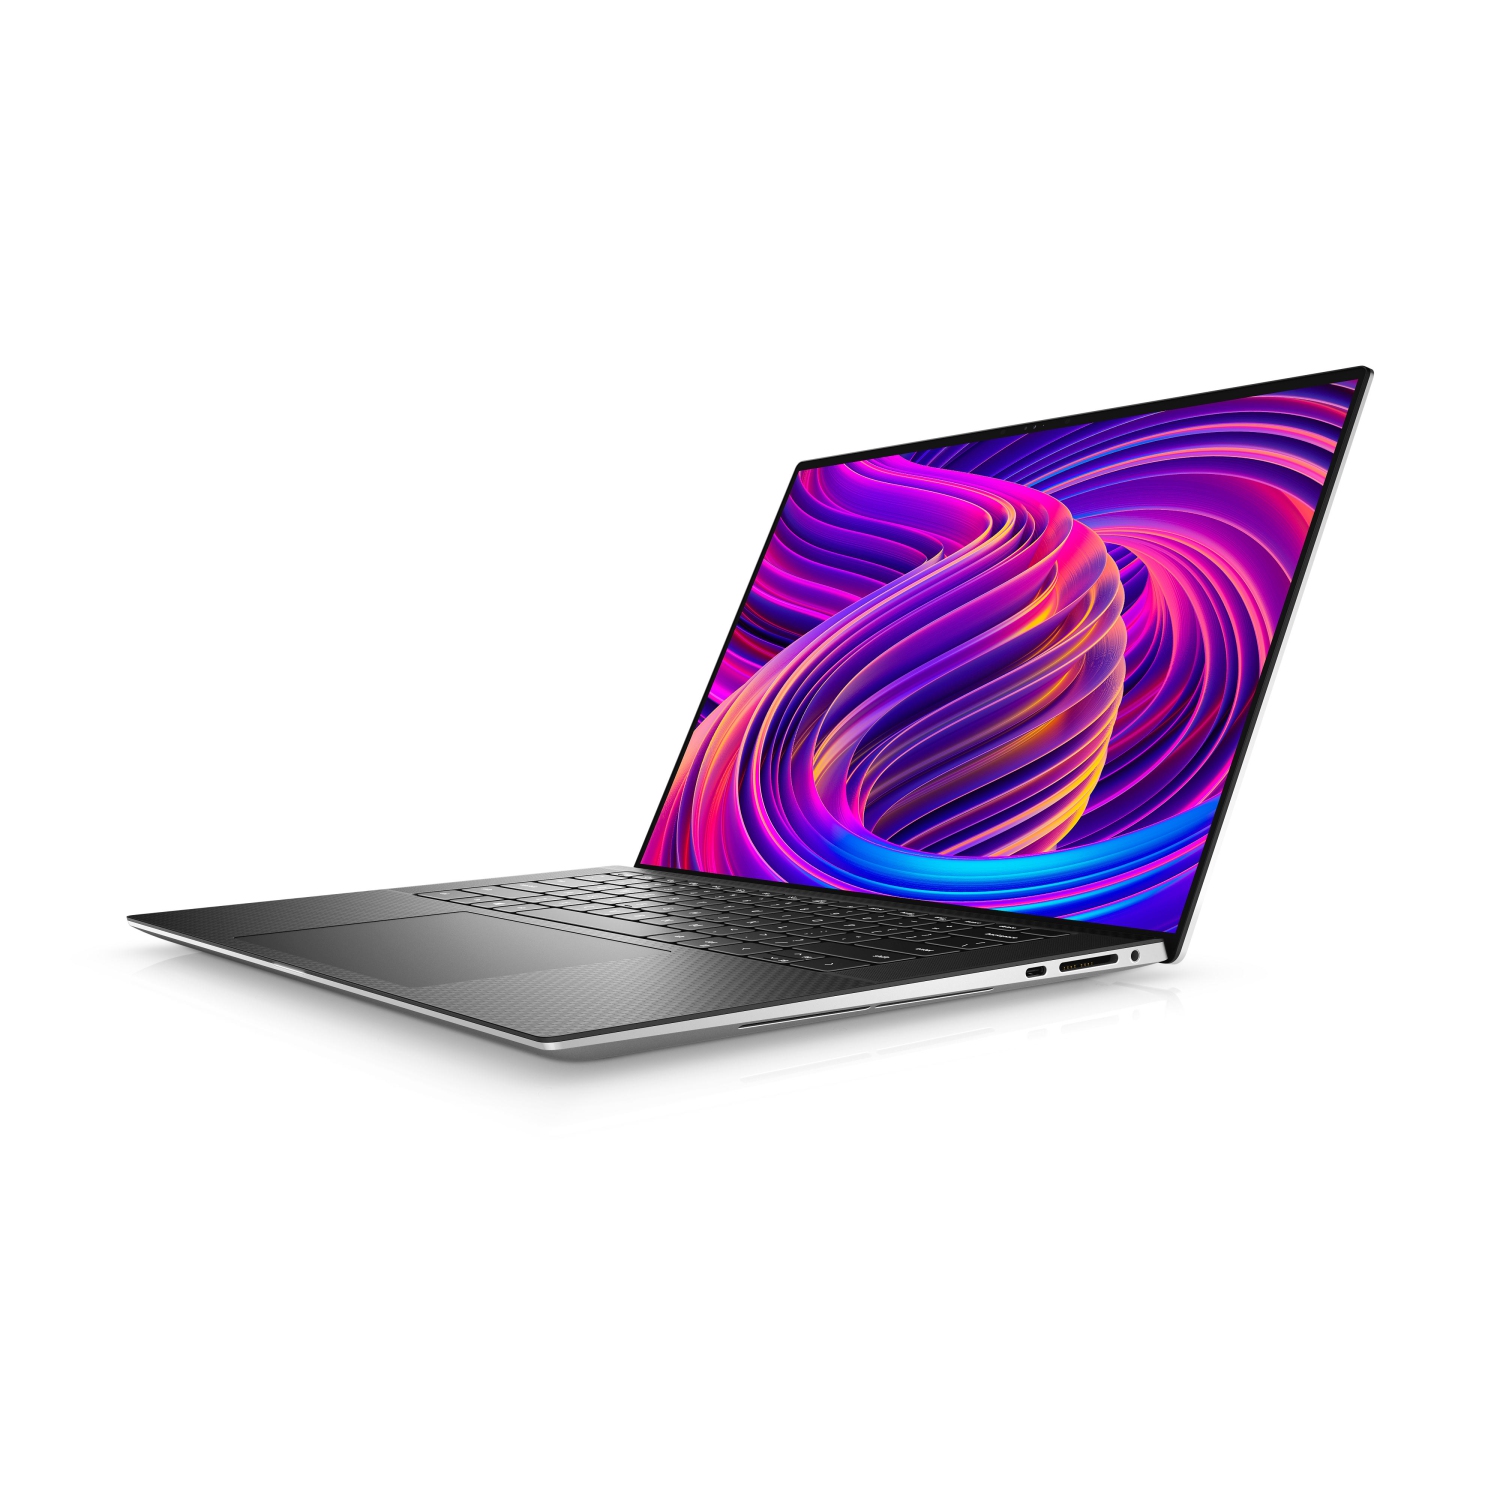 Refurbished (Excellent) - Dell XPS 15 9510 Laptop (2021), 15.6" FHD+, Core i7, 2TB SSD + 2TB SSD, 16GB RAM, RTX 3050, 8 Cores @ 4.6 GHz, 11th Gen CPU Certified